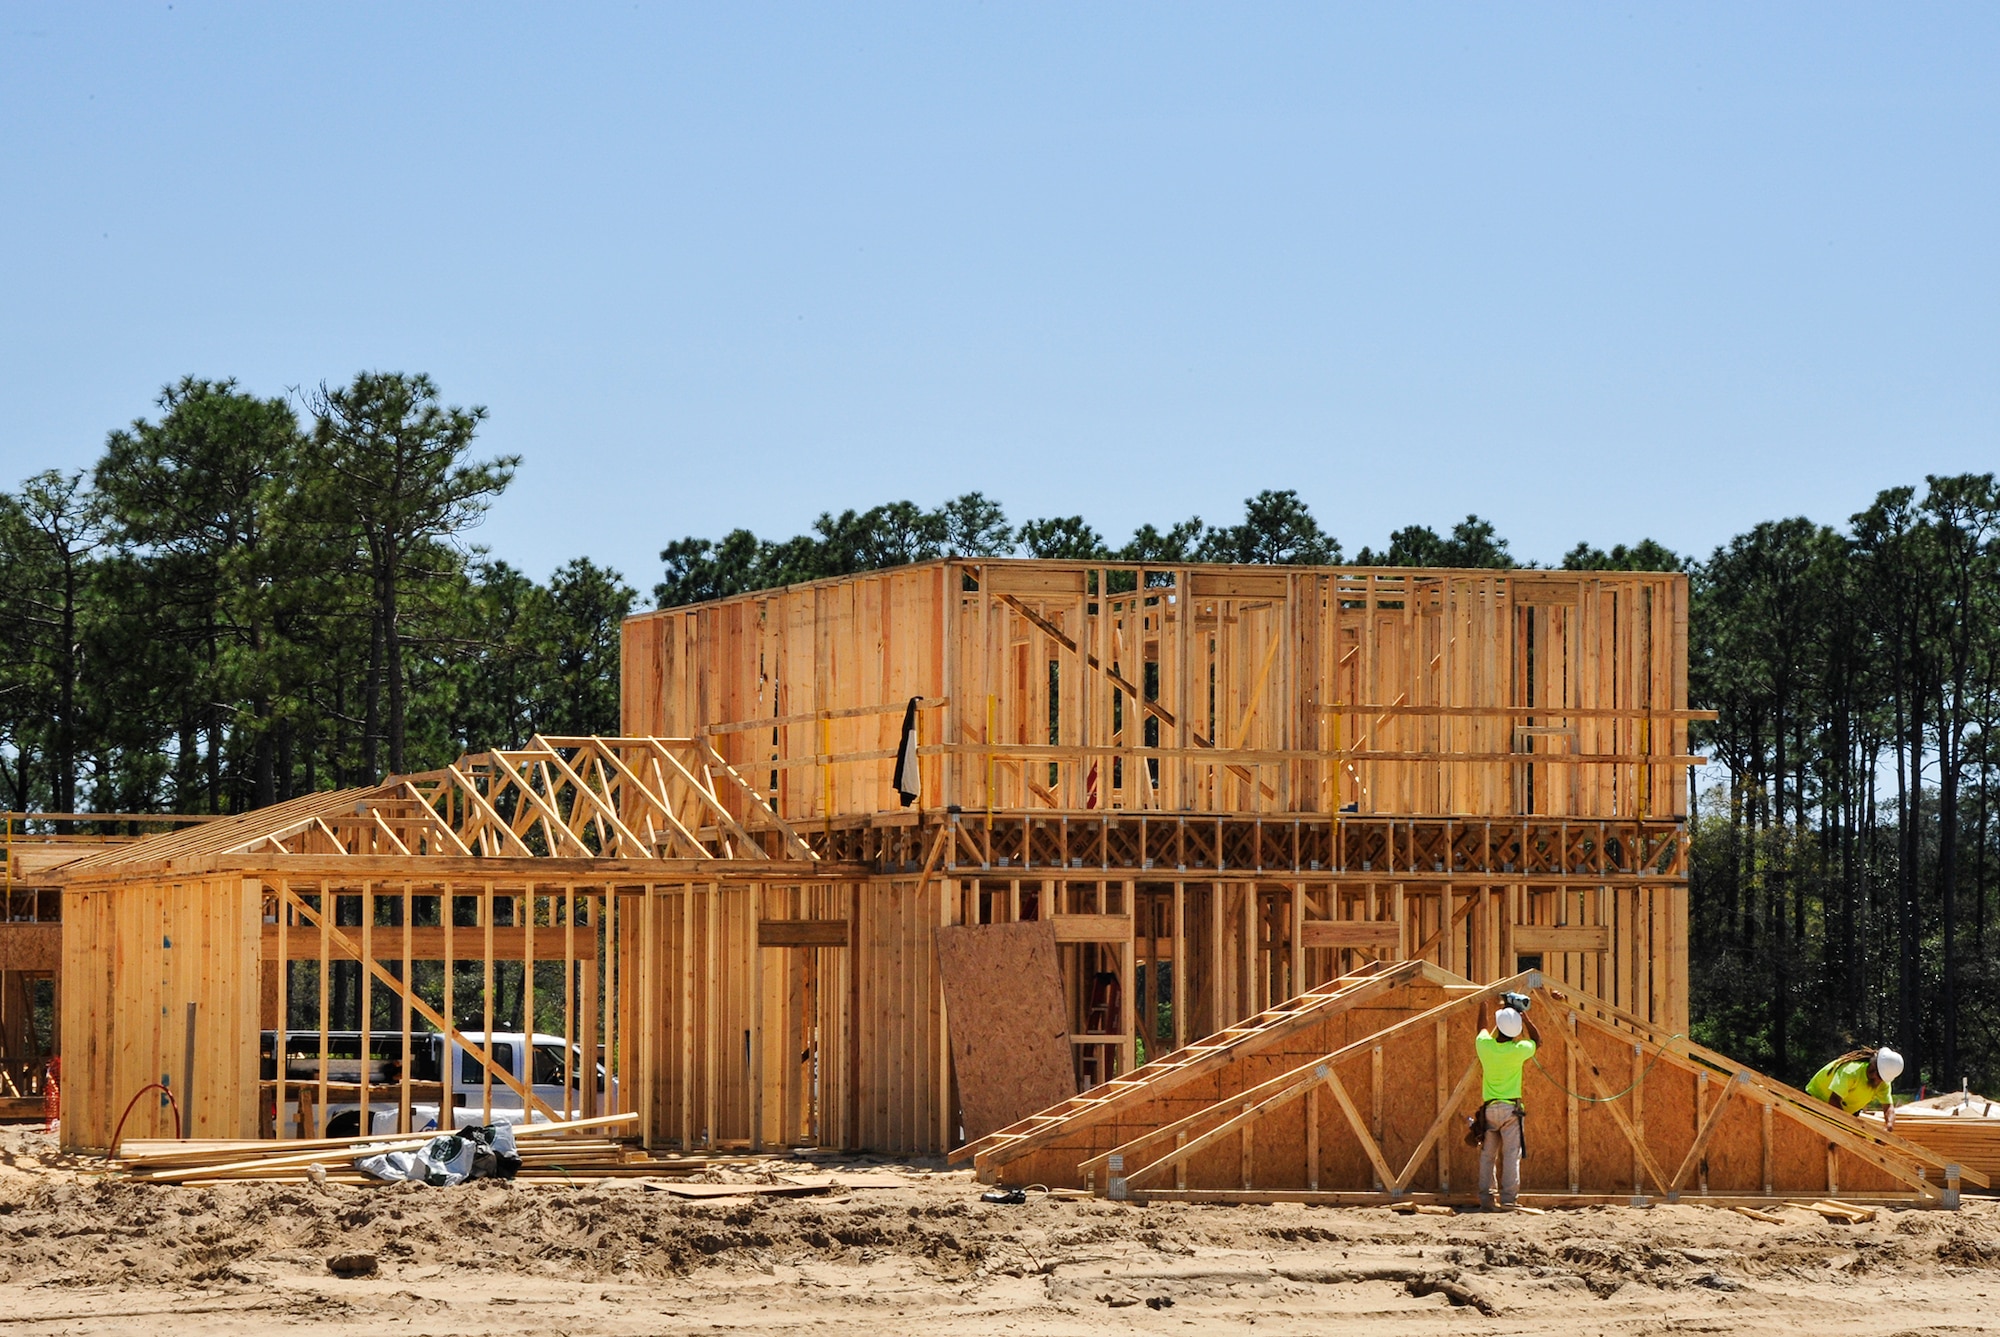 Construction workers make progress on one of the 747 privatized homes being built on Eglin Air Force Base, Fla., April 7. The new development will include multiple playgrounds, a dog-friendly “bark” park, a community center with a fitness room, and a pool. The entire community is estimated to be completed by 2019. (U.S. Air Force Photo/Jasmine Porterfield)